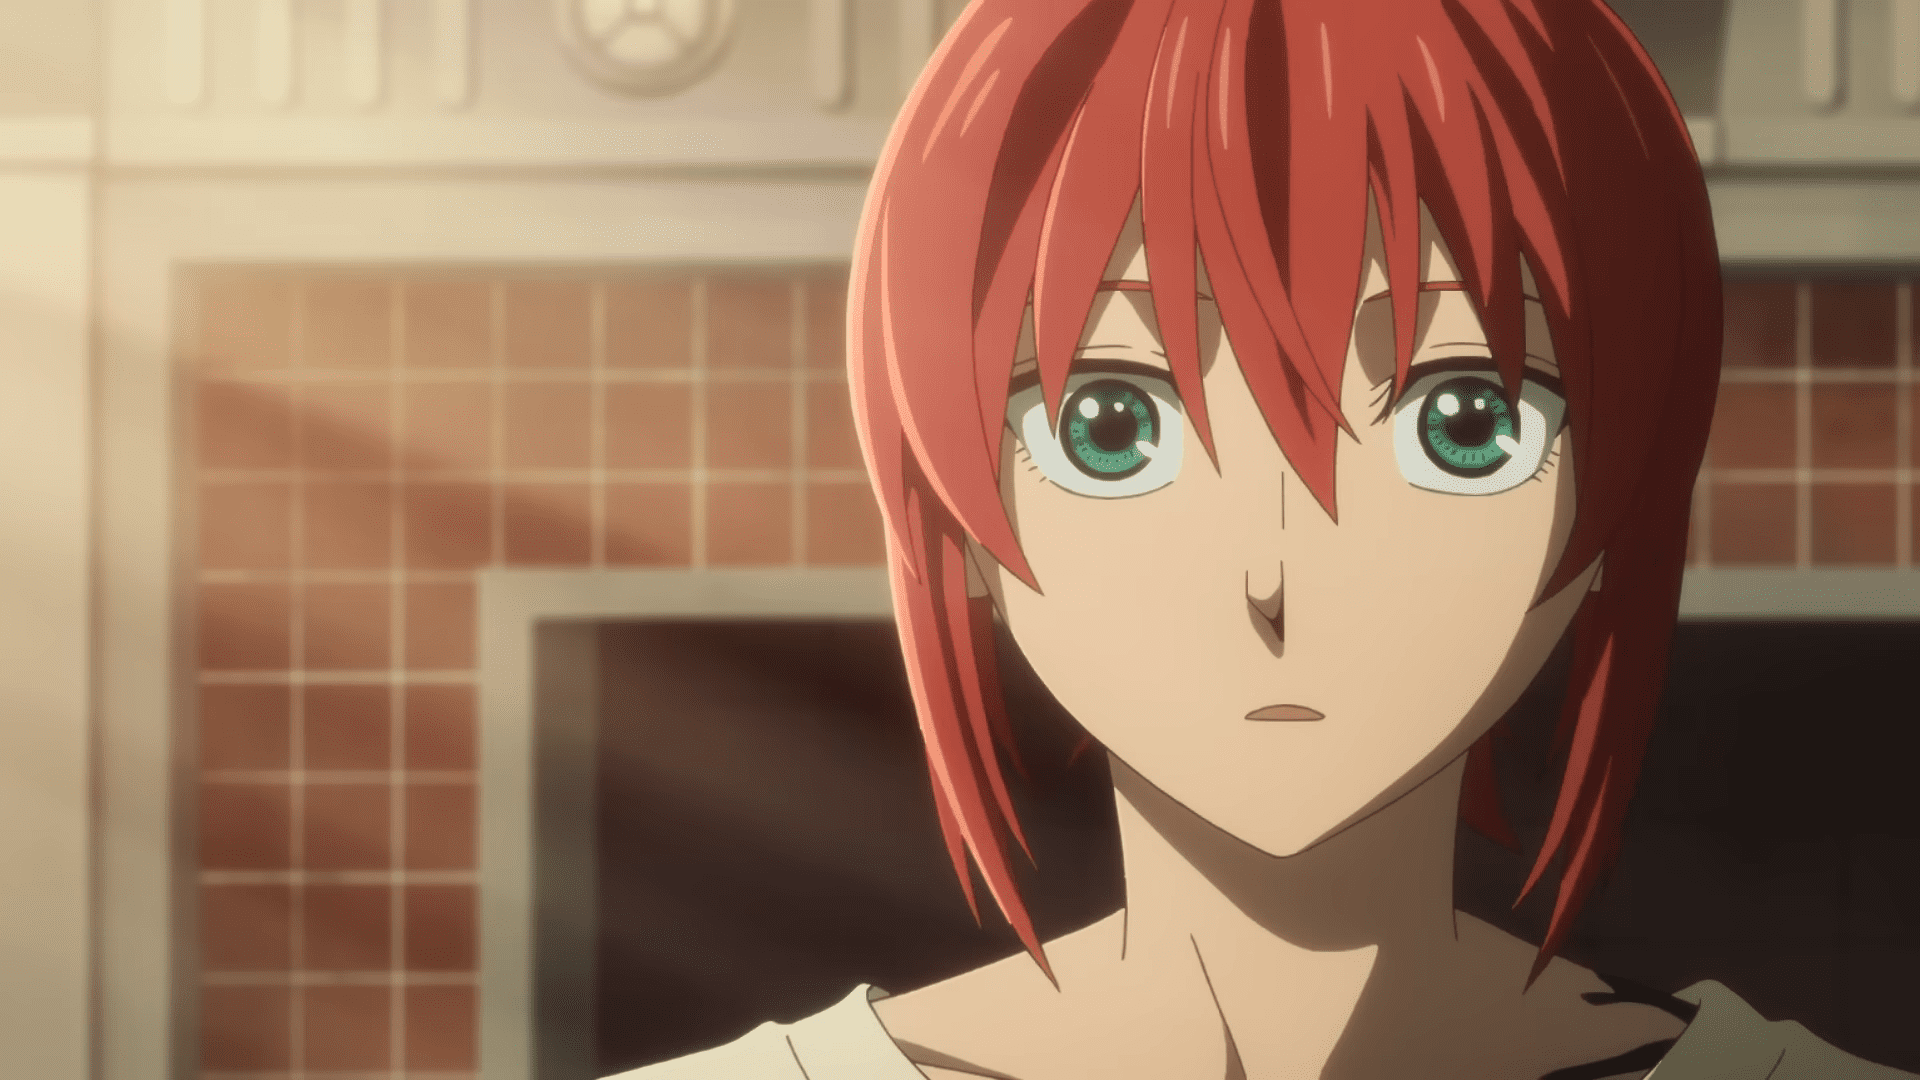 Chise Hatori as shown in the anime